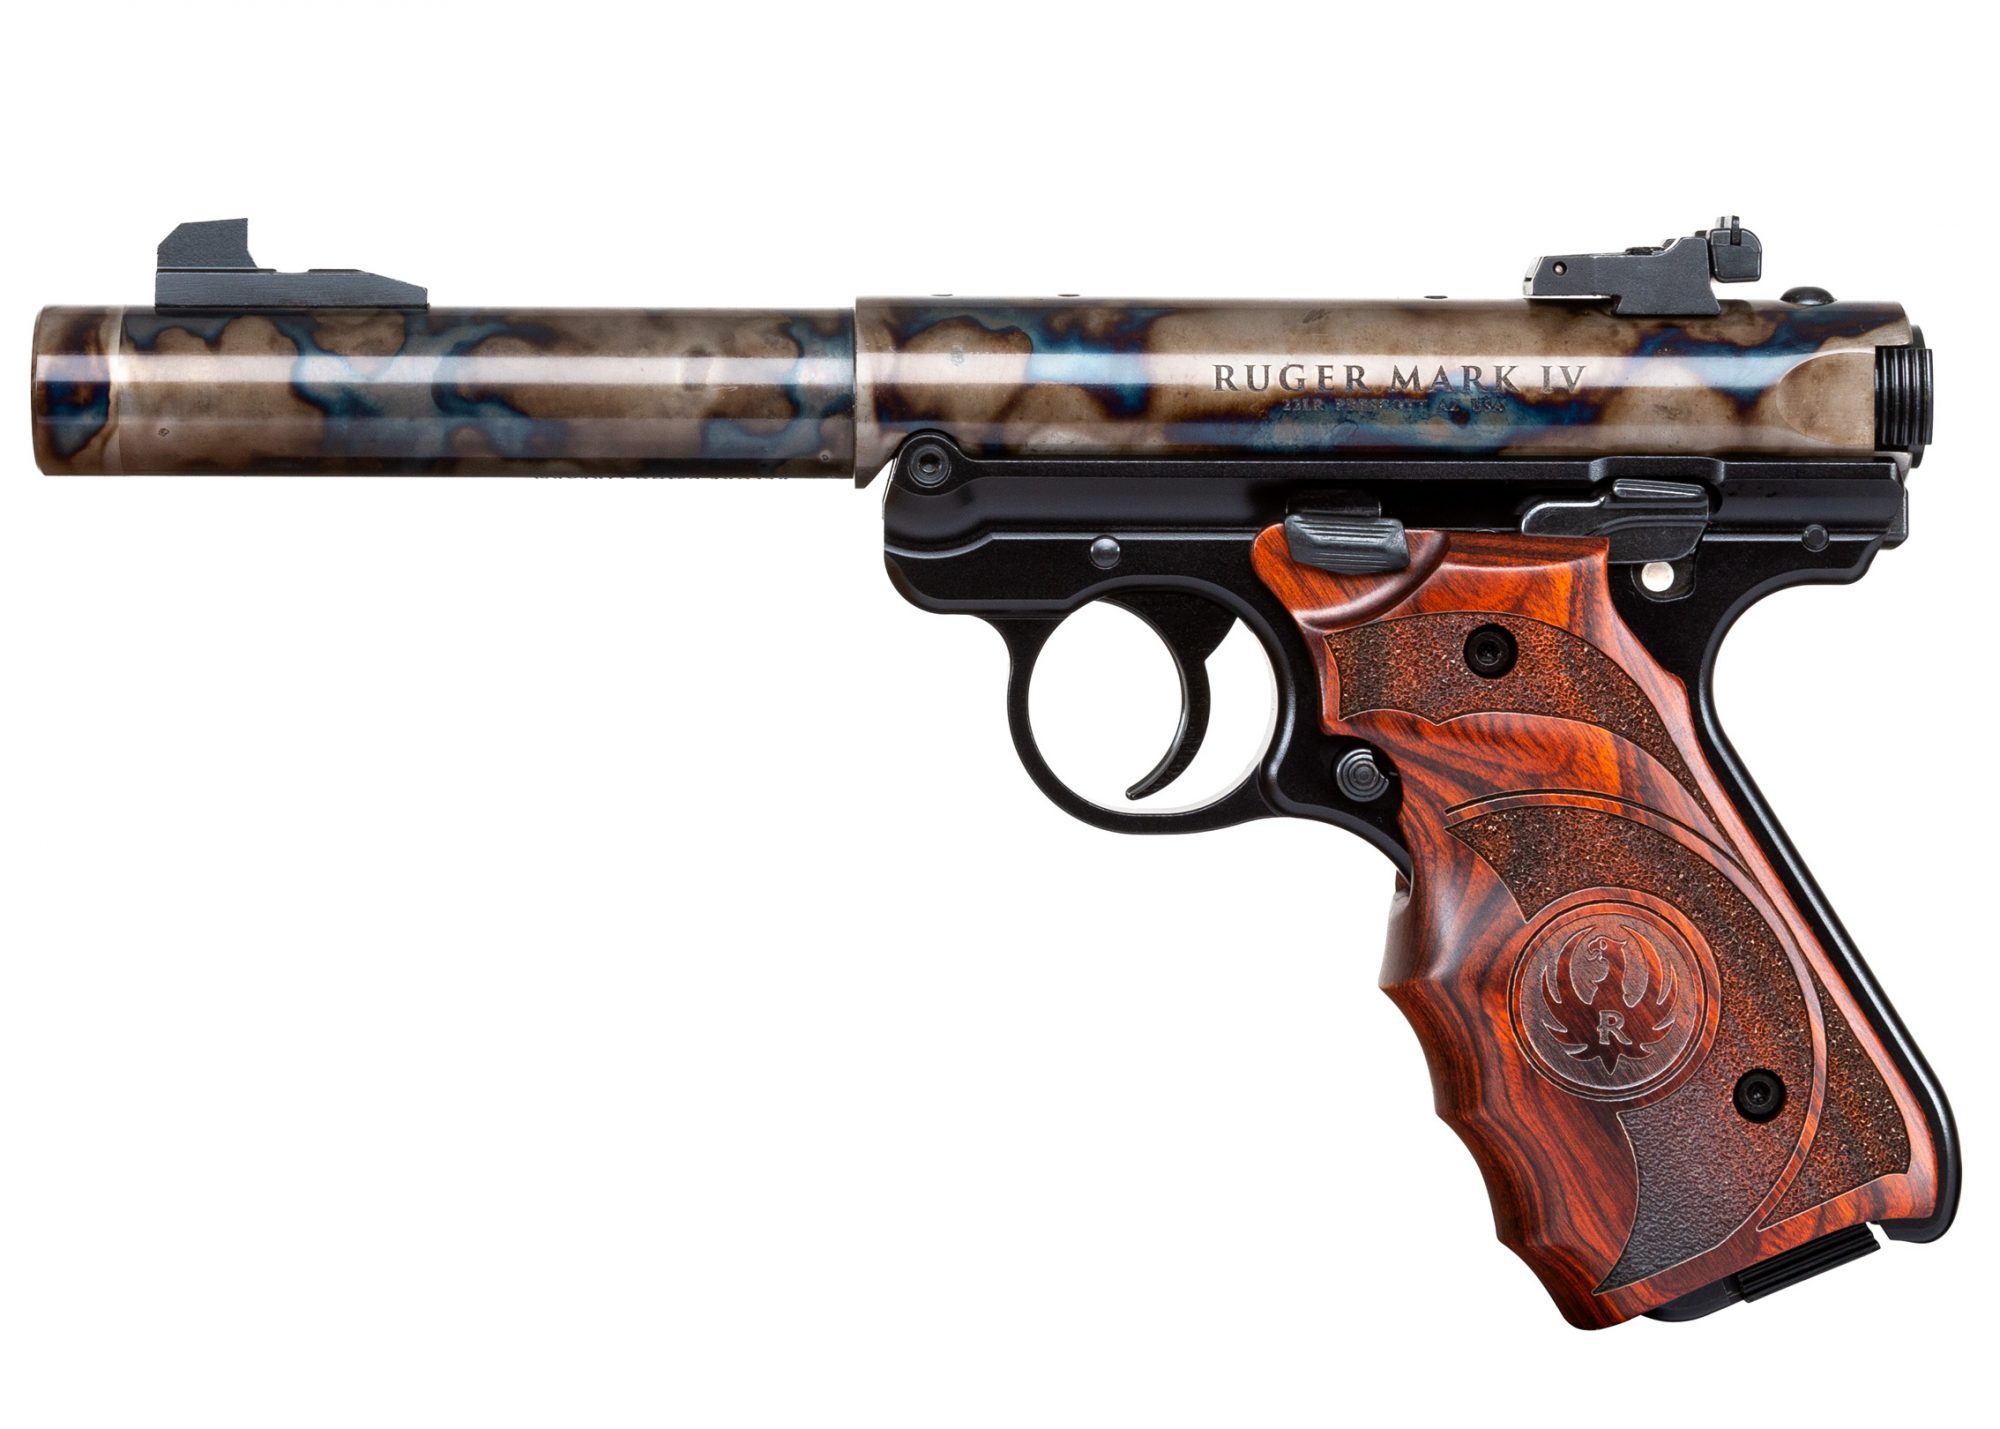 Turnbull Finished Ruger Mark IV with Wood Grips and Threaded Barrel